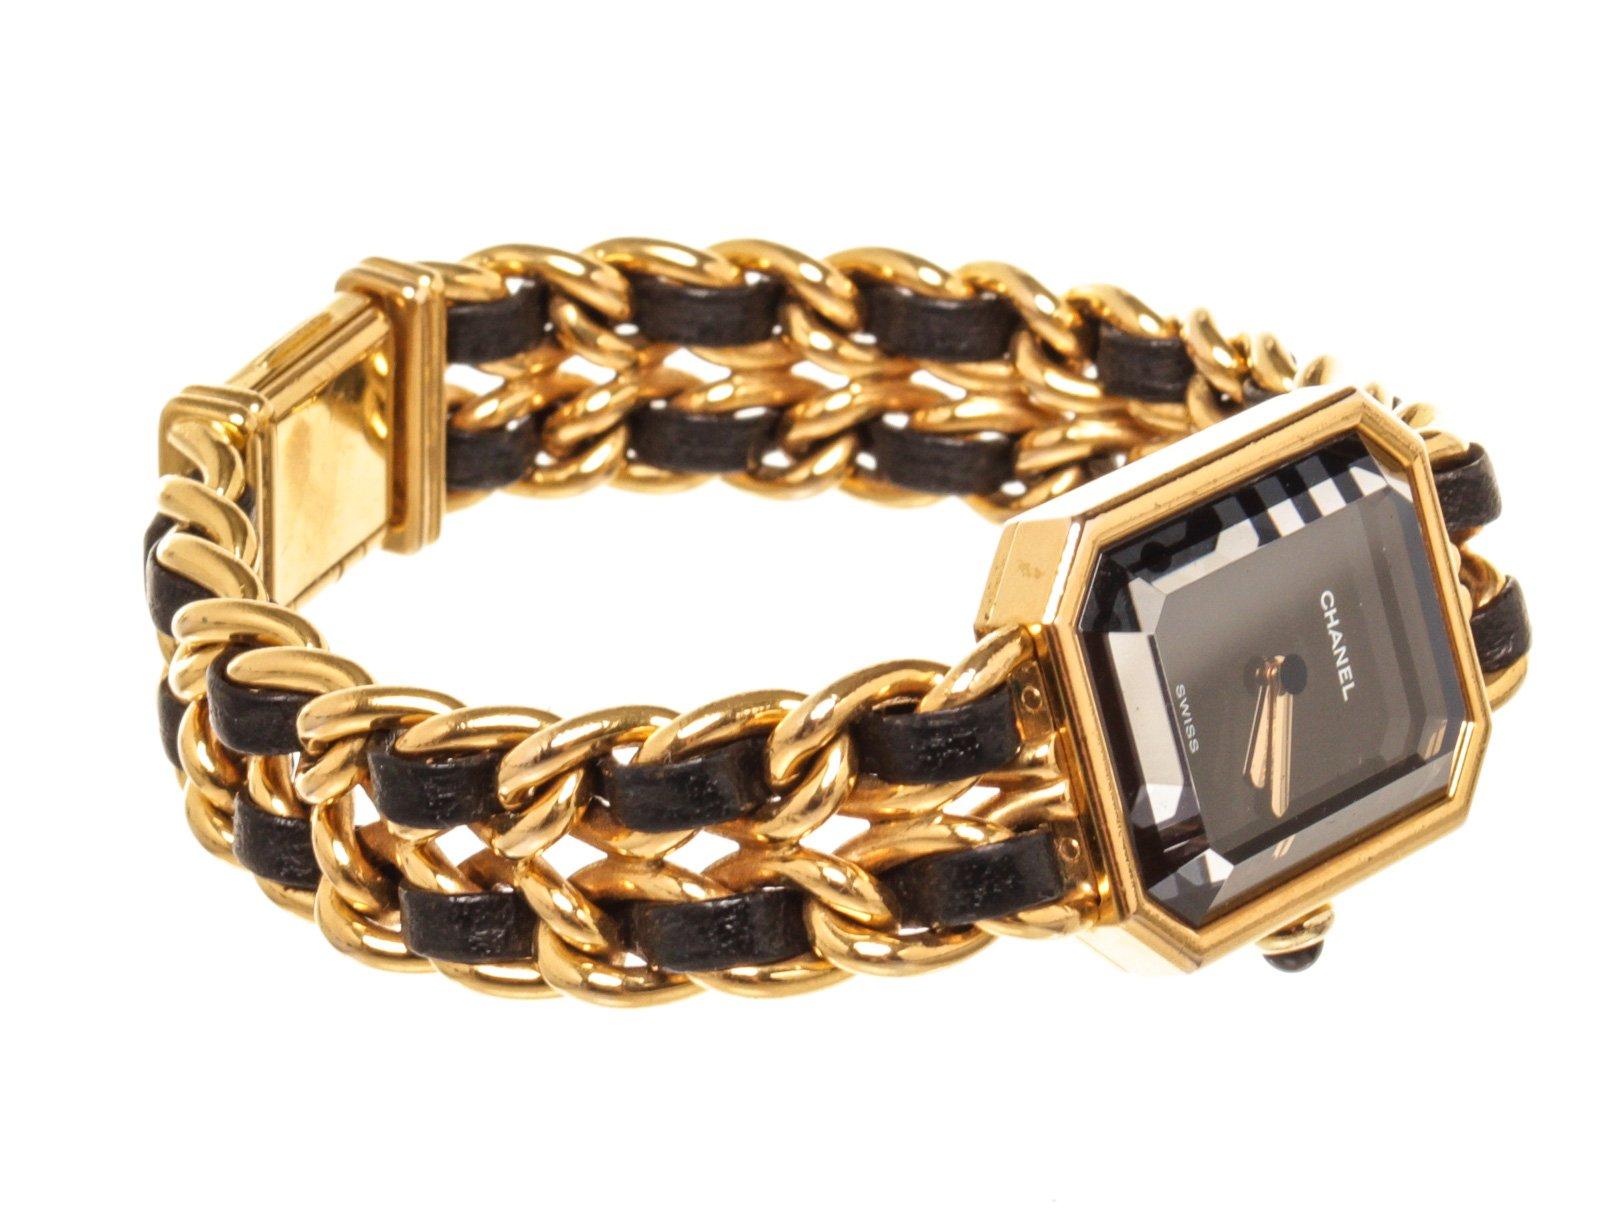 Chanel Gold Leather Premiere L Watch with leather, yellow gold-plated and black leather bracelet; hinged clasp closure.

42135MSC